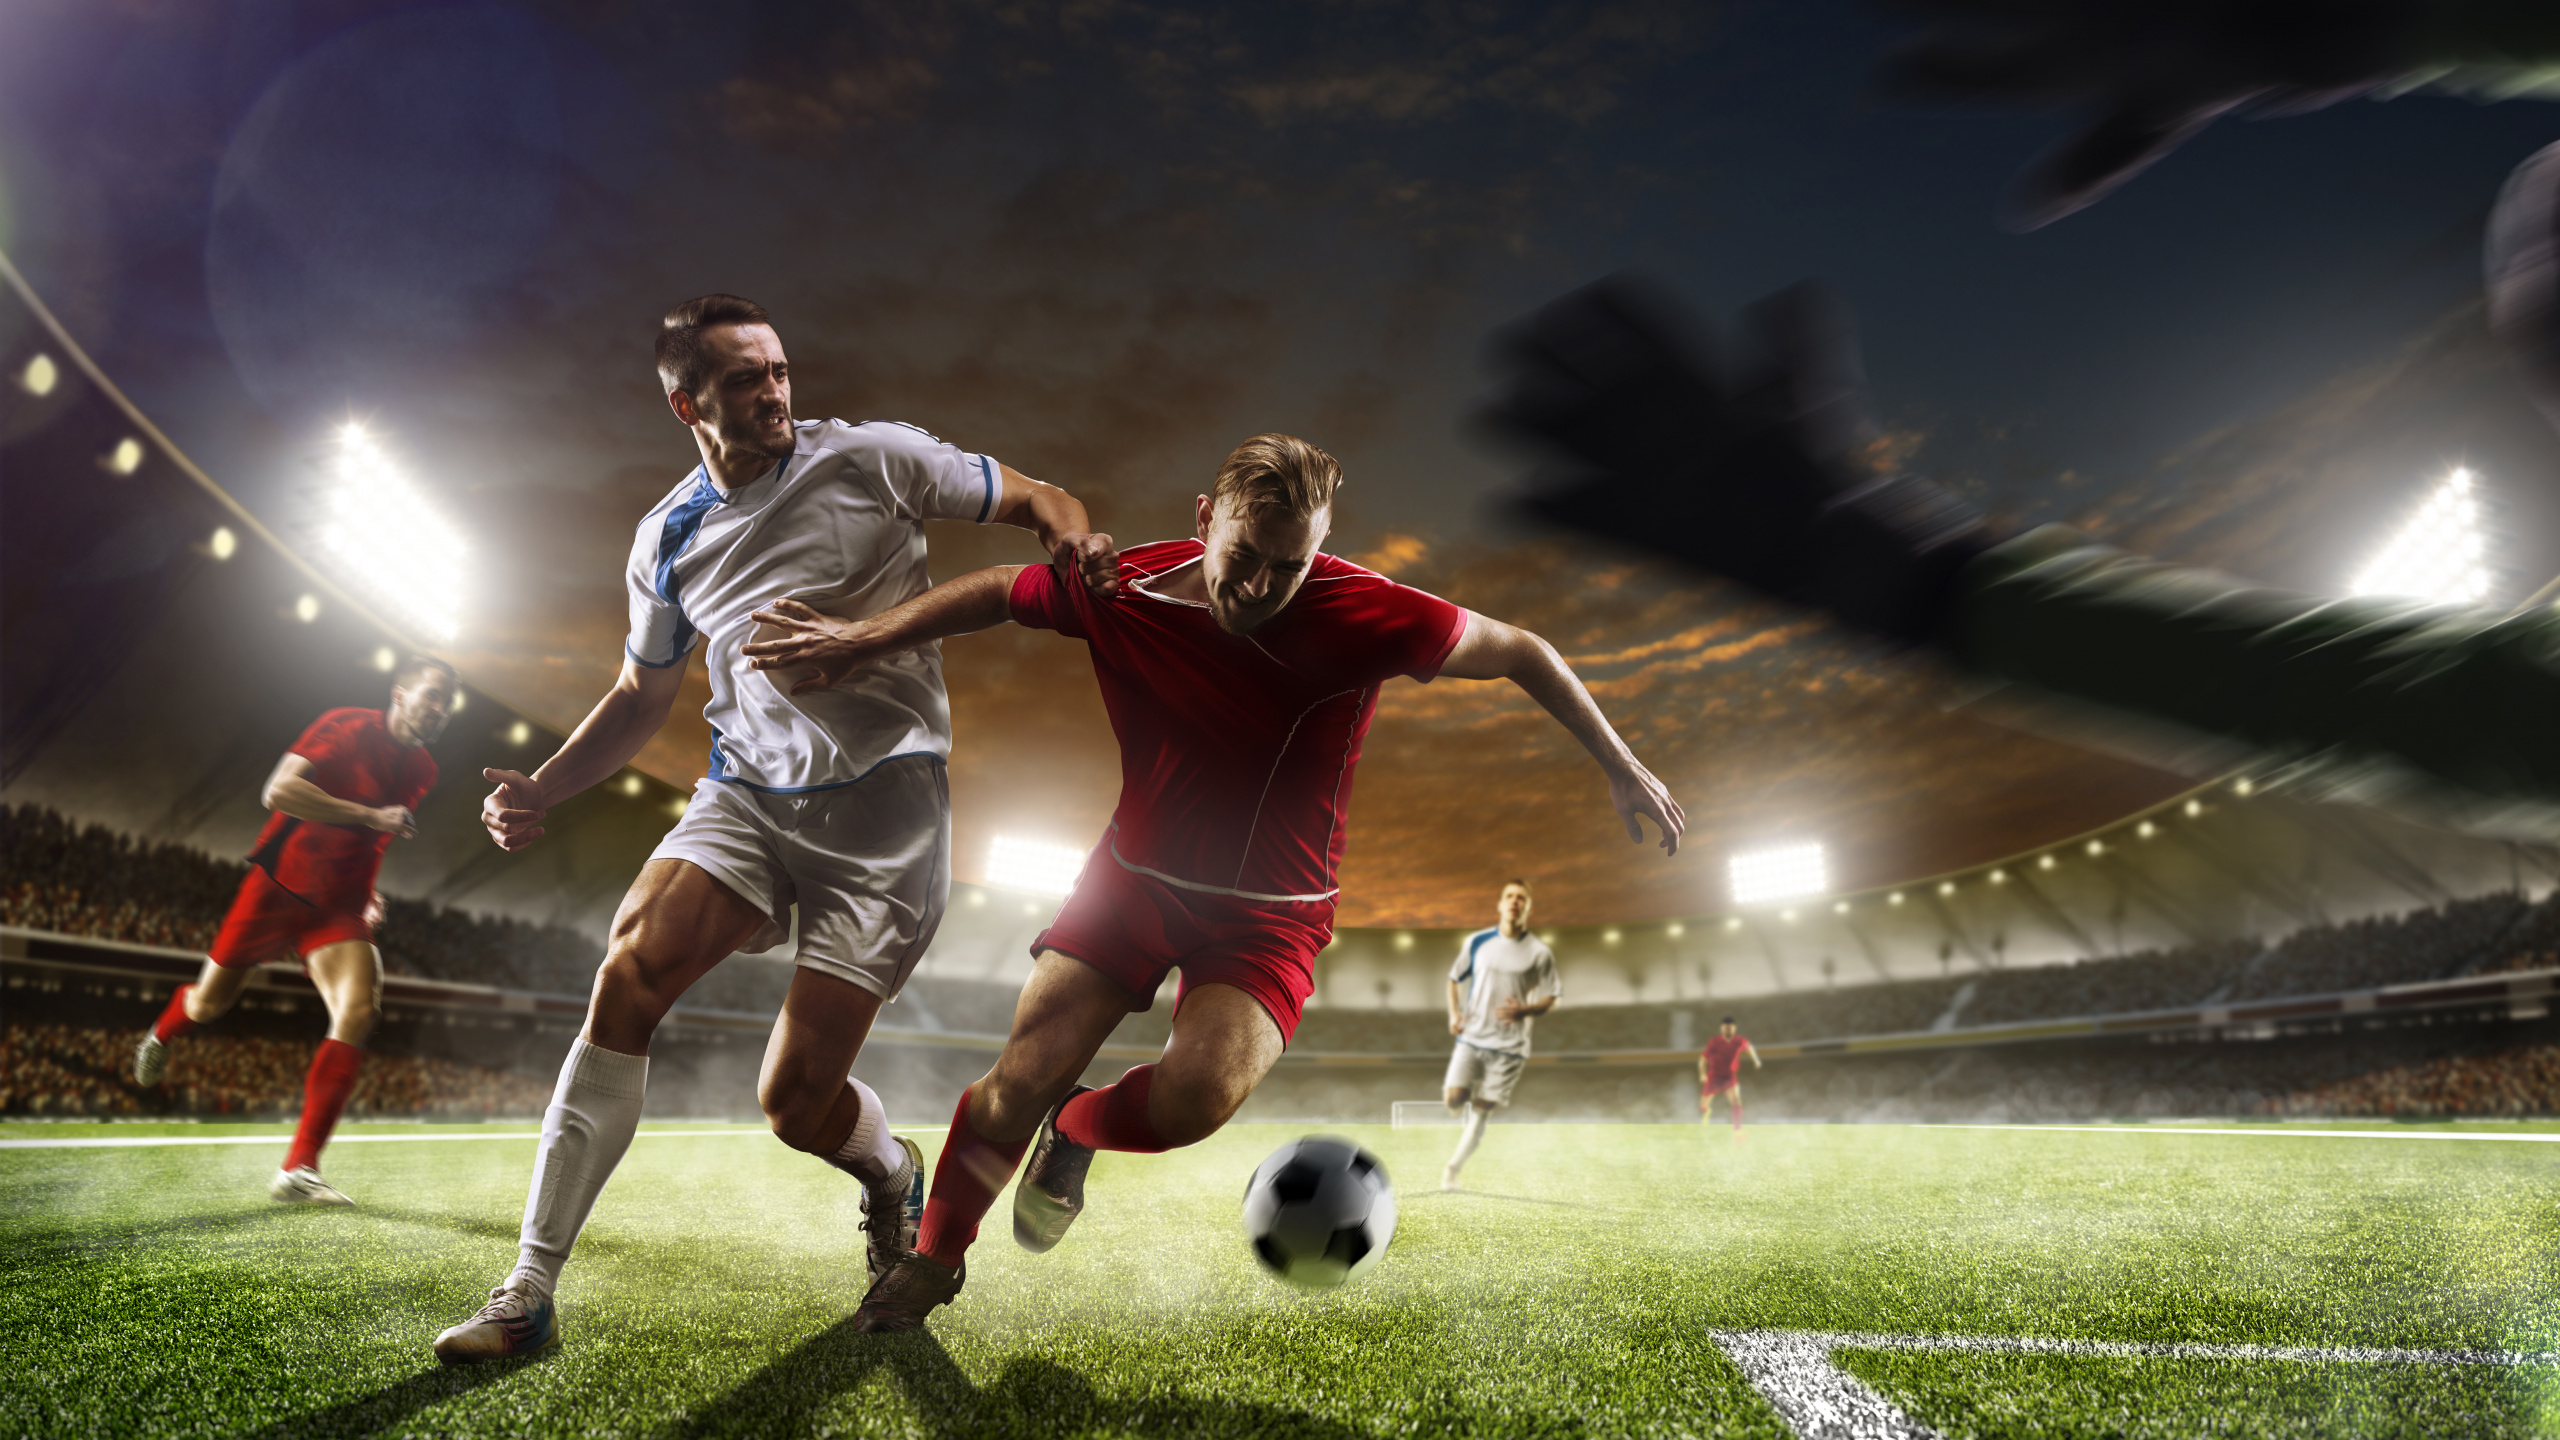 2 Men Playing Soccer on Green Grass Field During Nighttime. Wallpaper in 2560x1440 Resolution